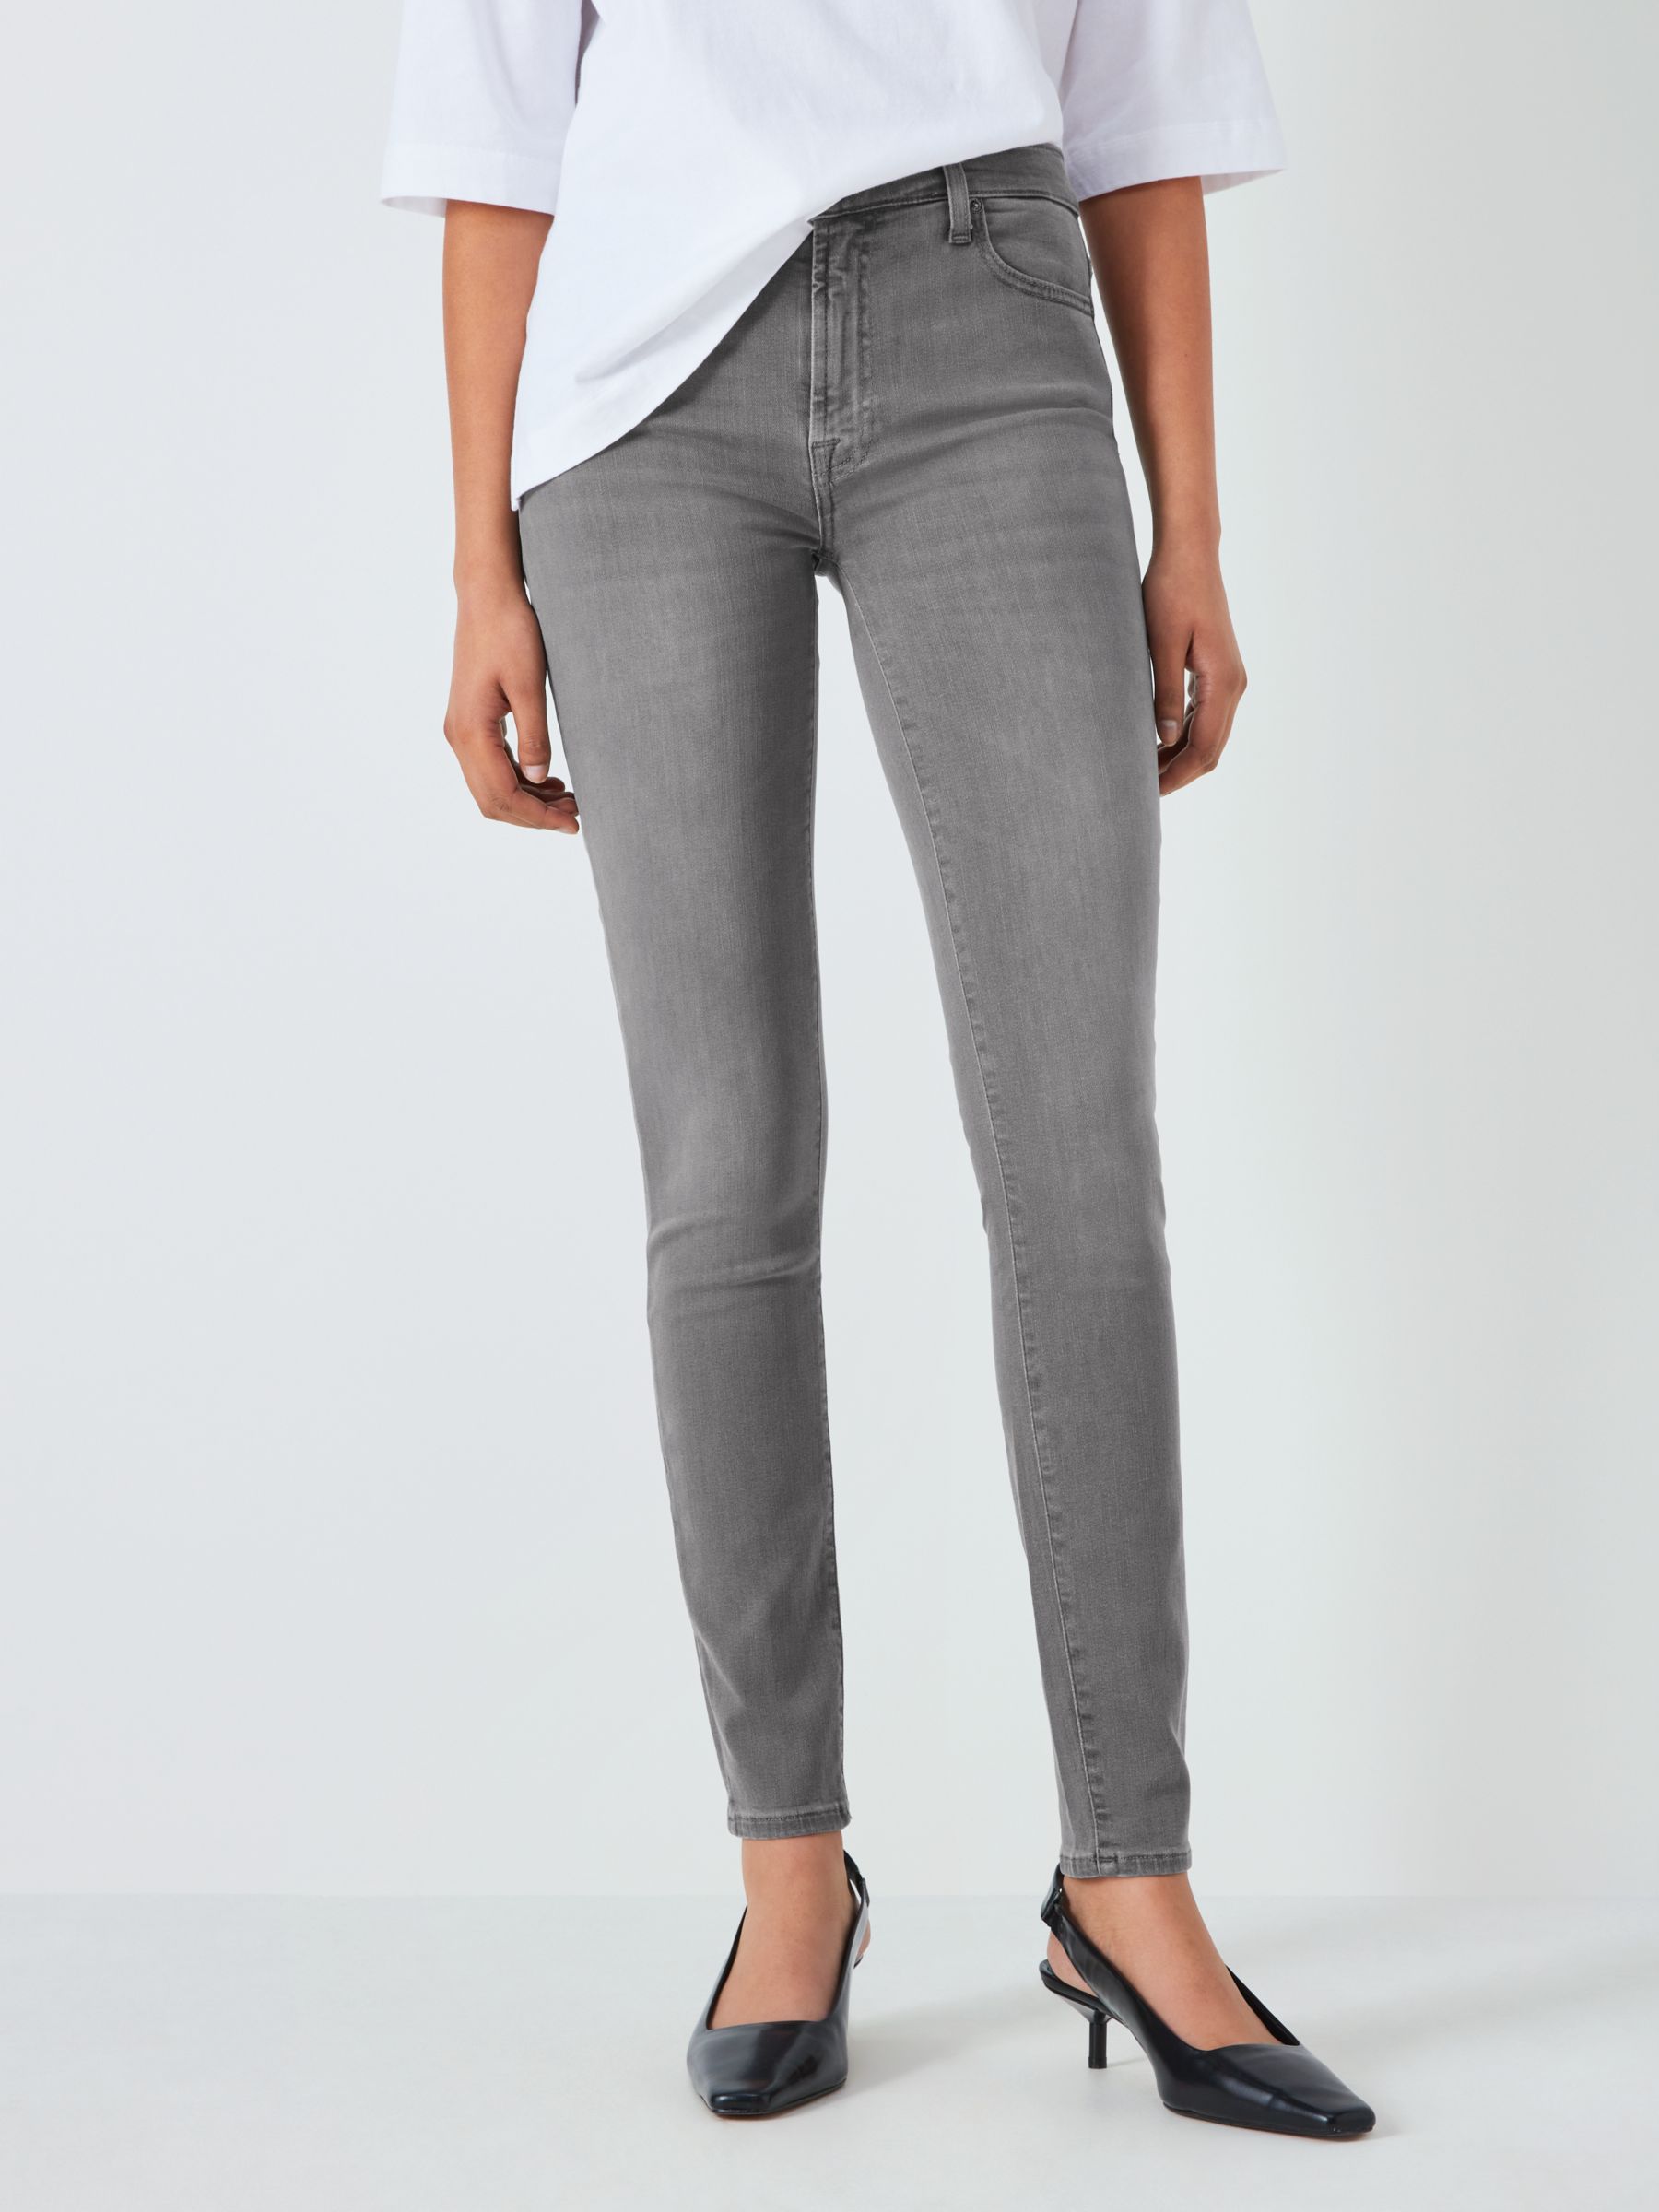 7 For All Mankind Skinny Slim Fit Jeans, Grey, 24